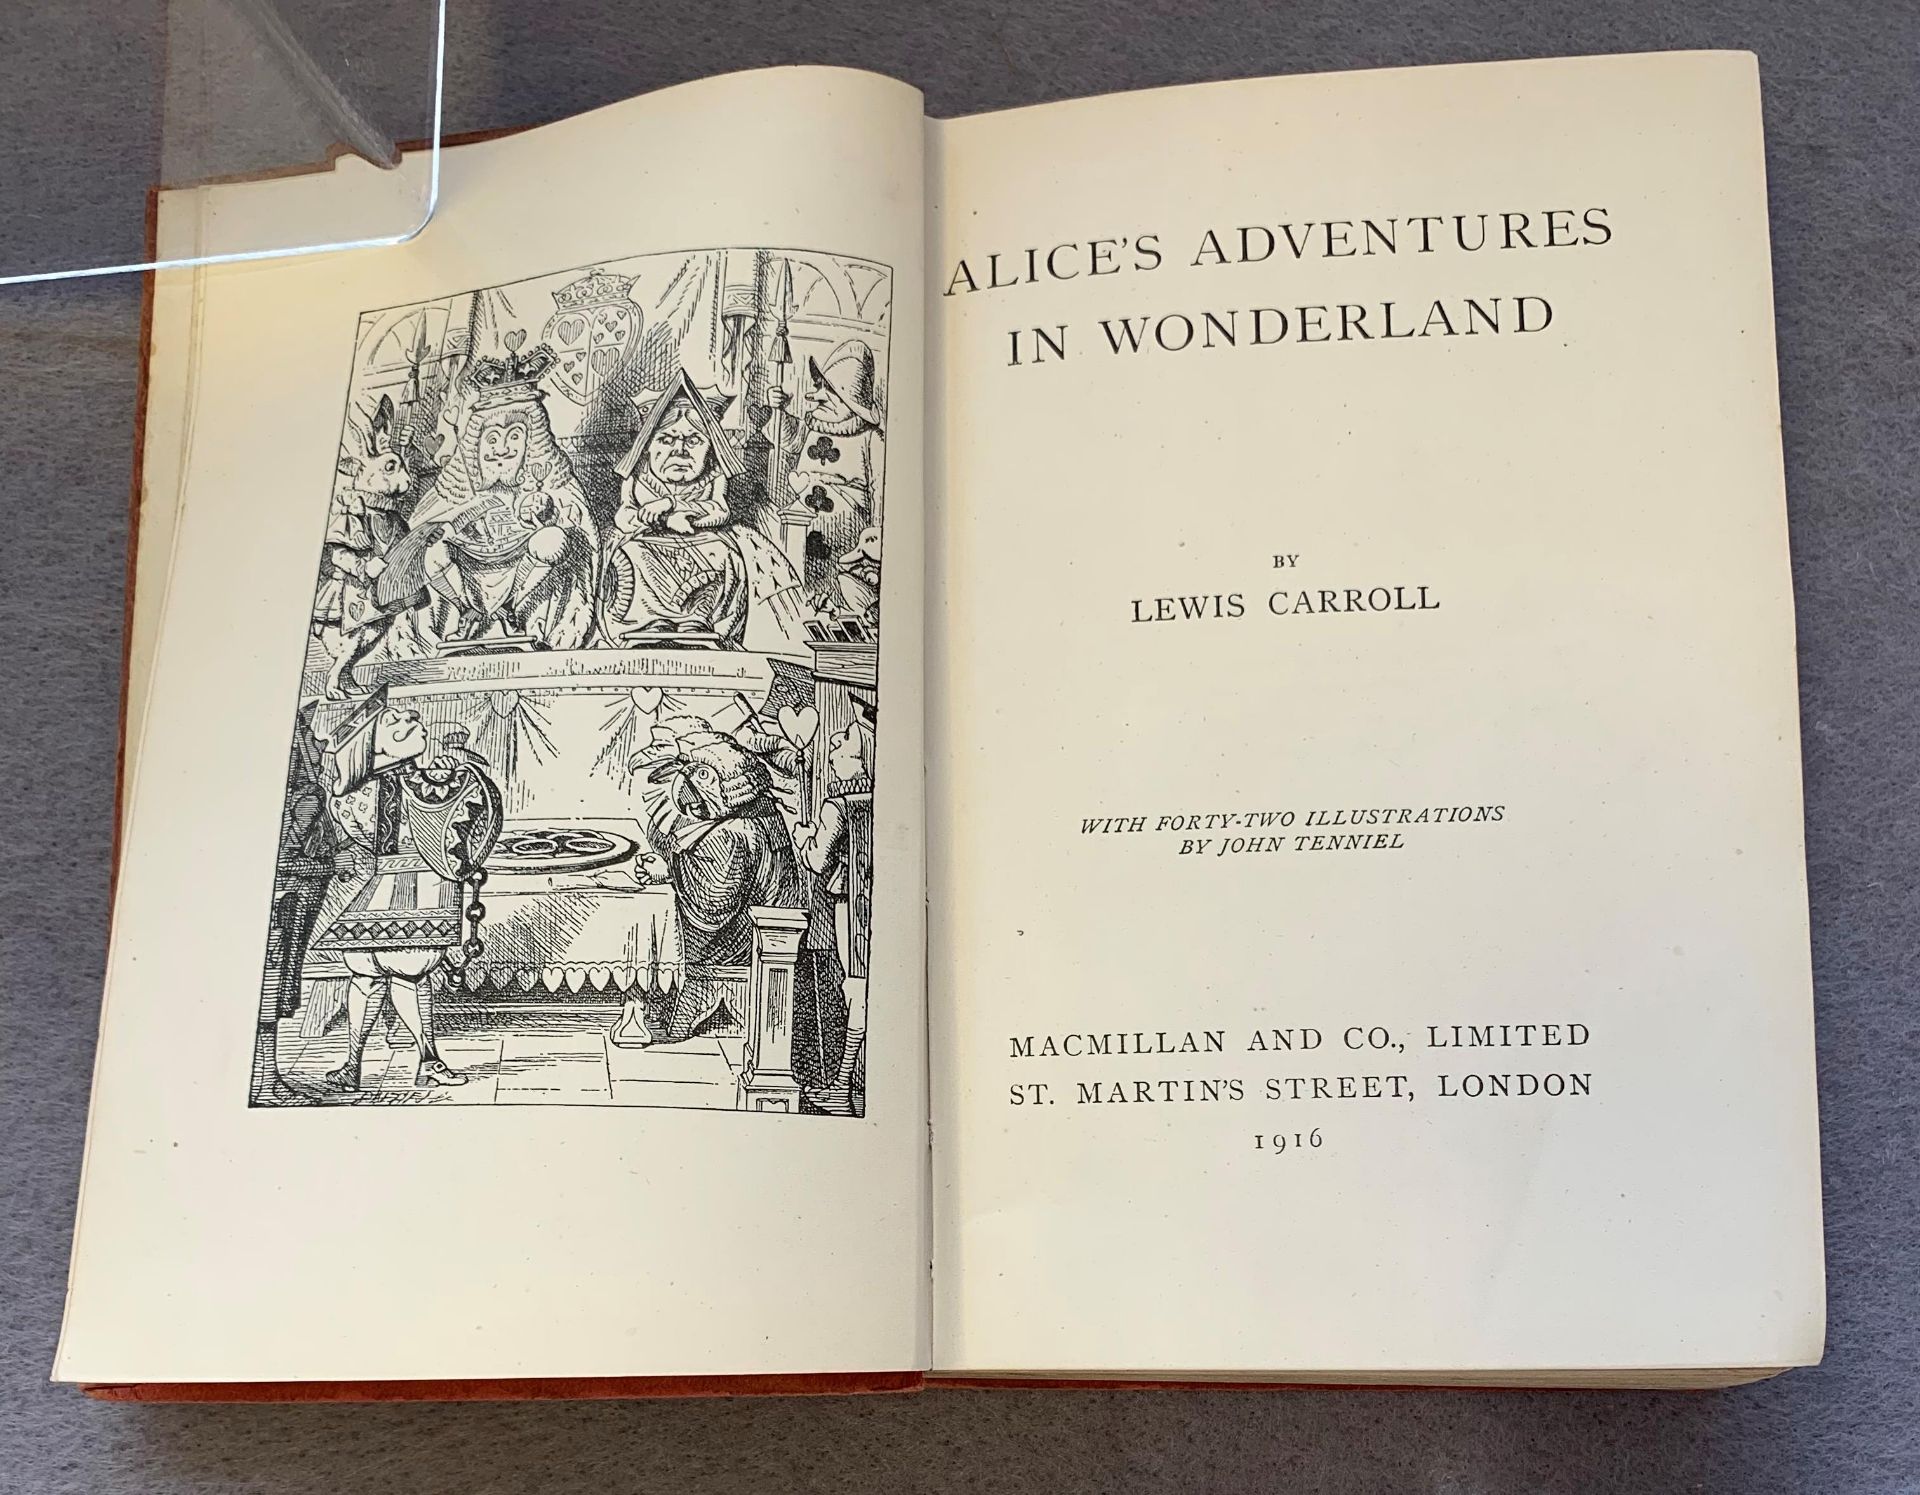 LEWIS CAROLL, ALICE'S ADVENTURES IN WONDERLAND: With forty-two illustrations by John Tenniel,